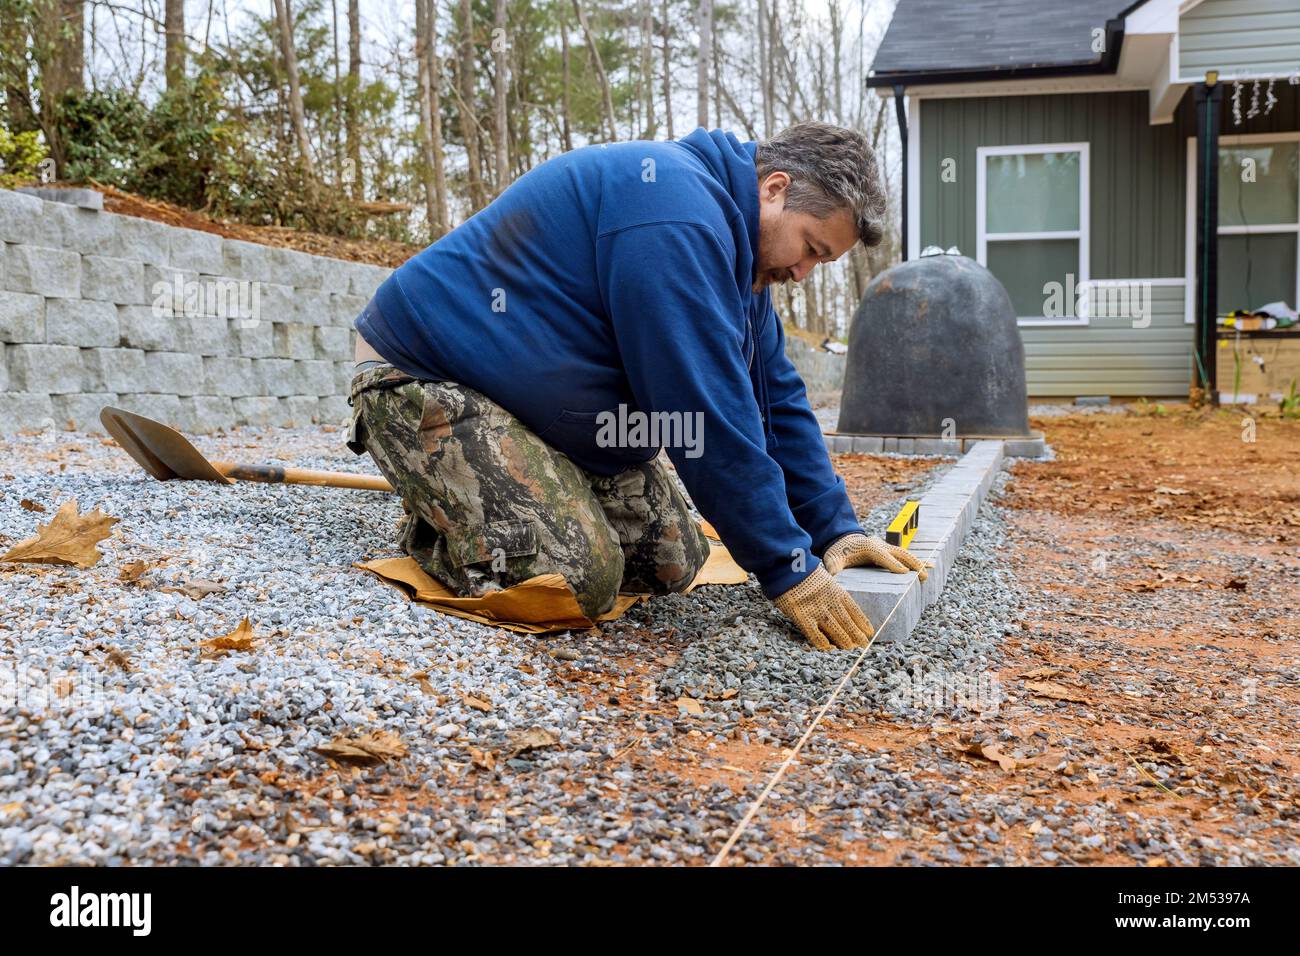 Using professional paver worker master lays down stones for pathway paving project. Stock Photo